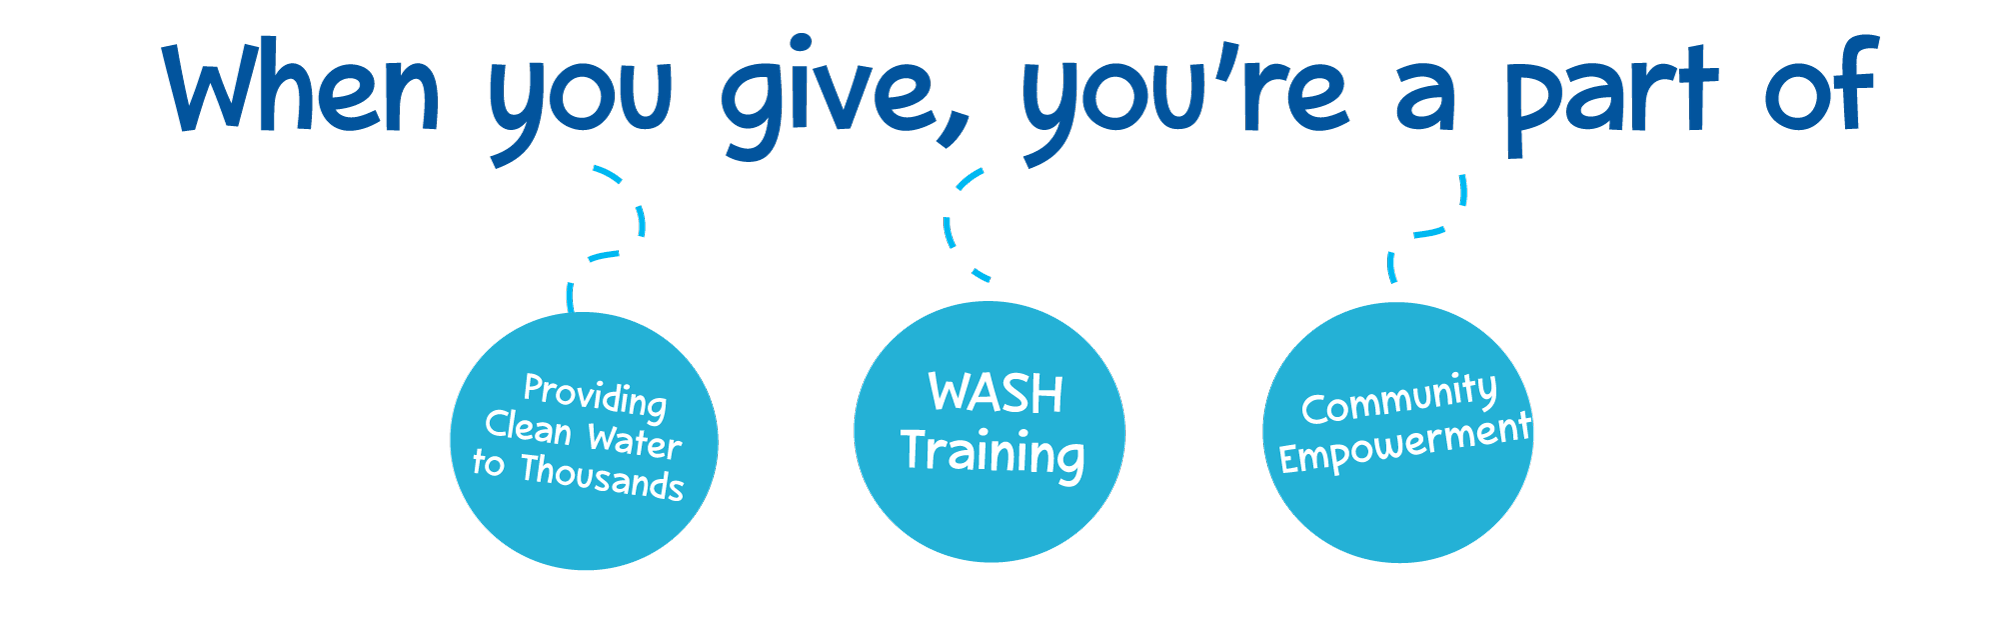 When you give, you are part of providing clean water to thousands, WASH training, and community empowerment